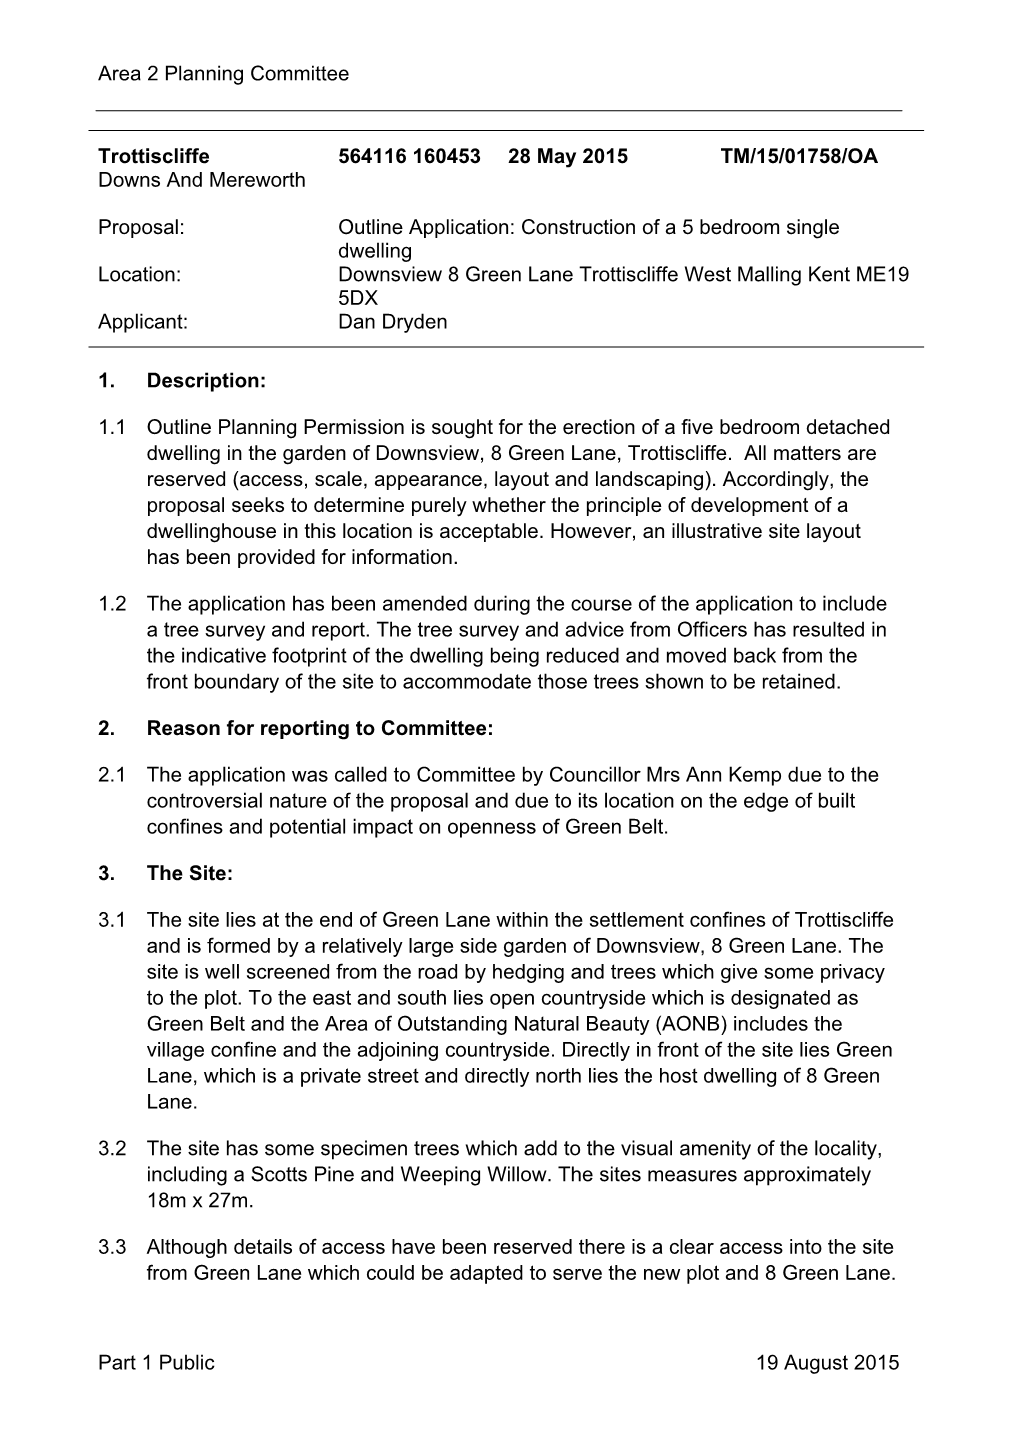 Area 2 Planning Committee Part 1 Public 19 August 2015 Trottiscliffe